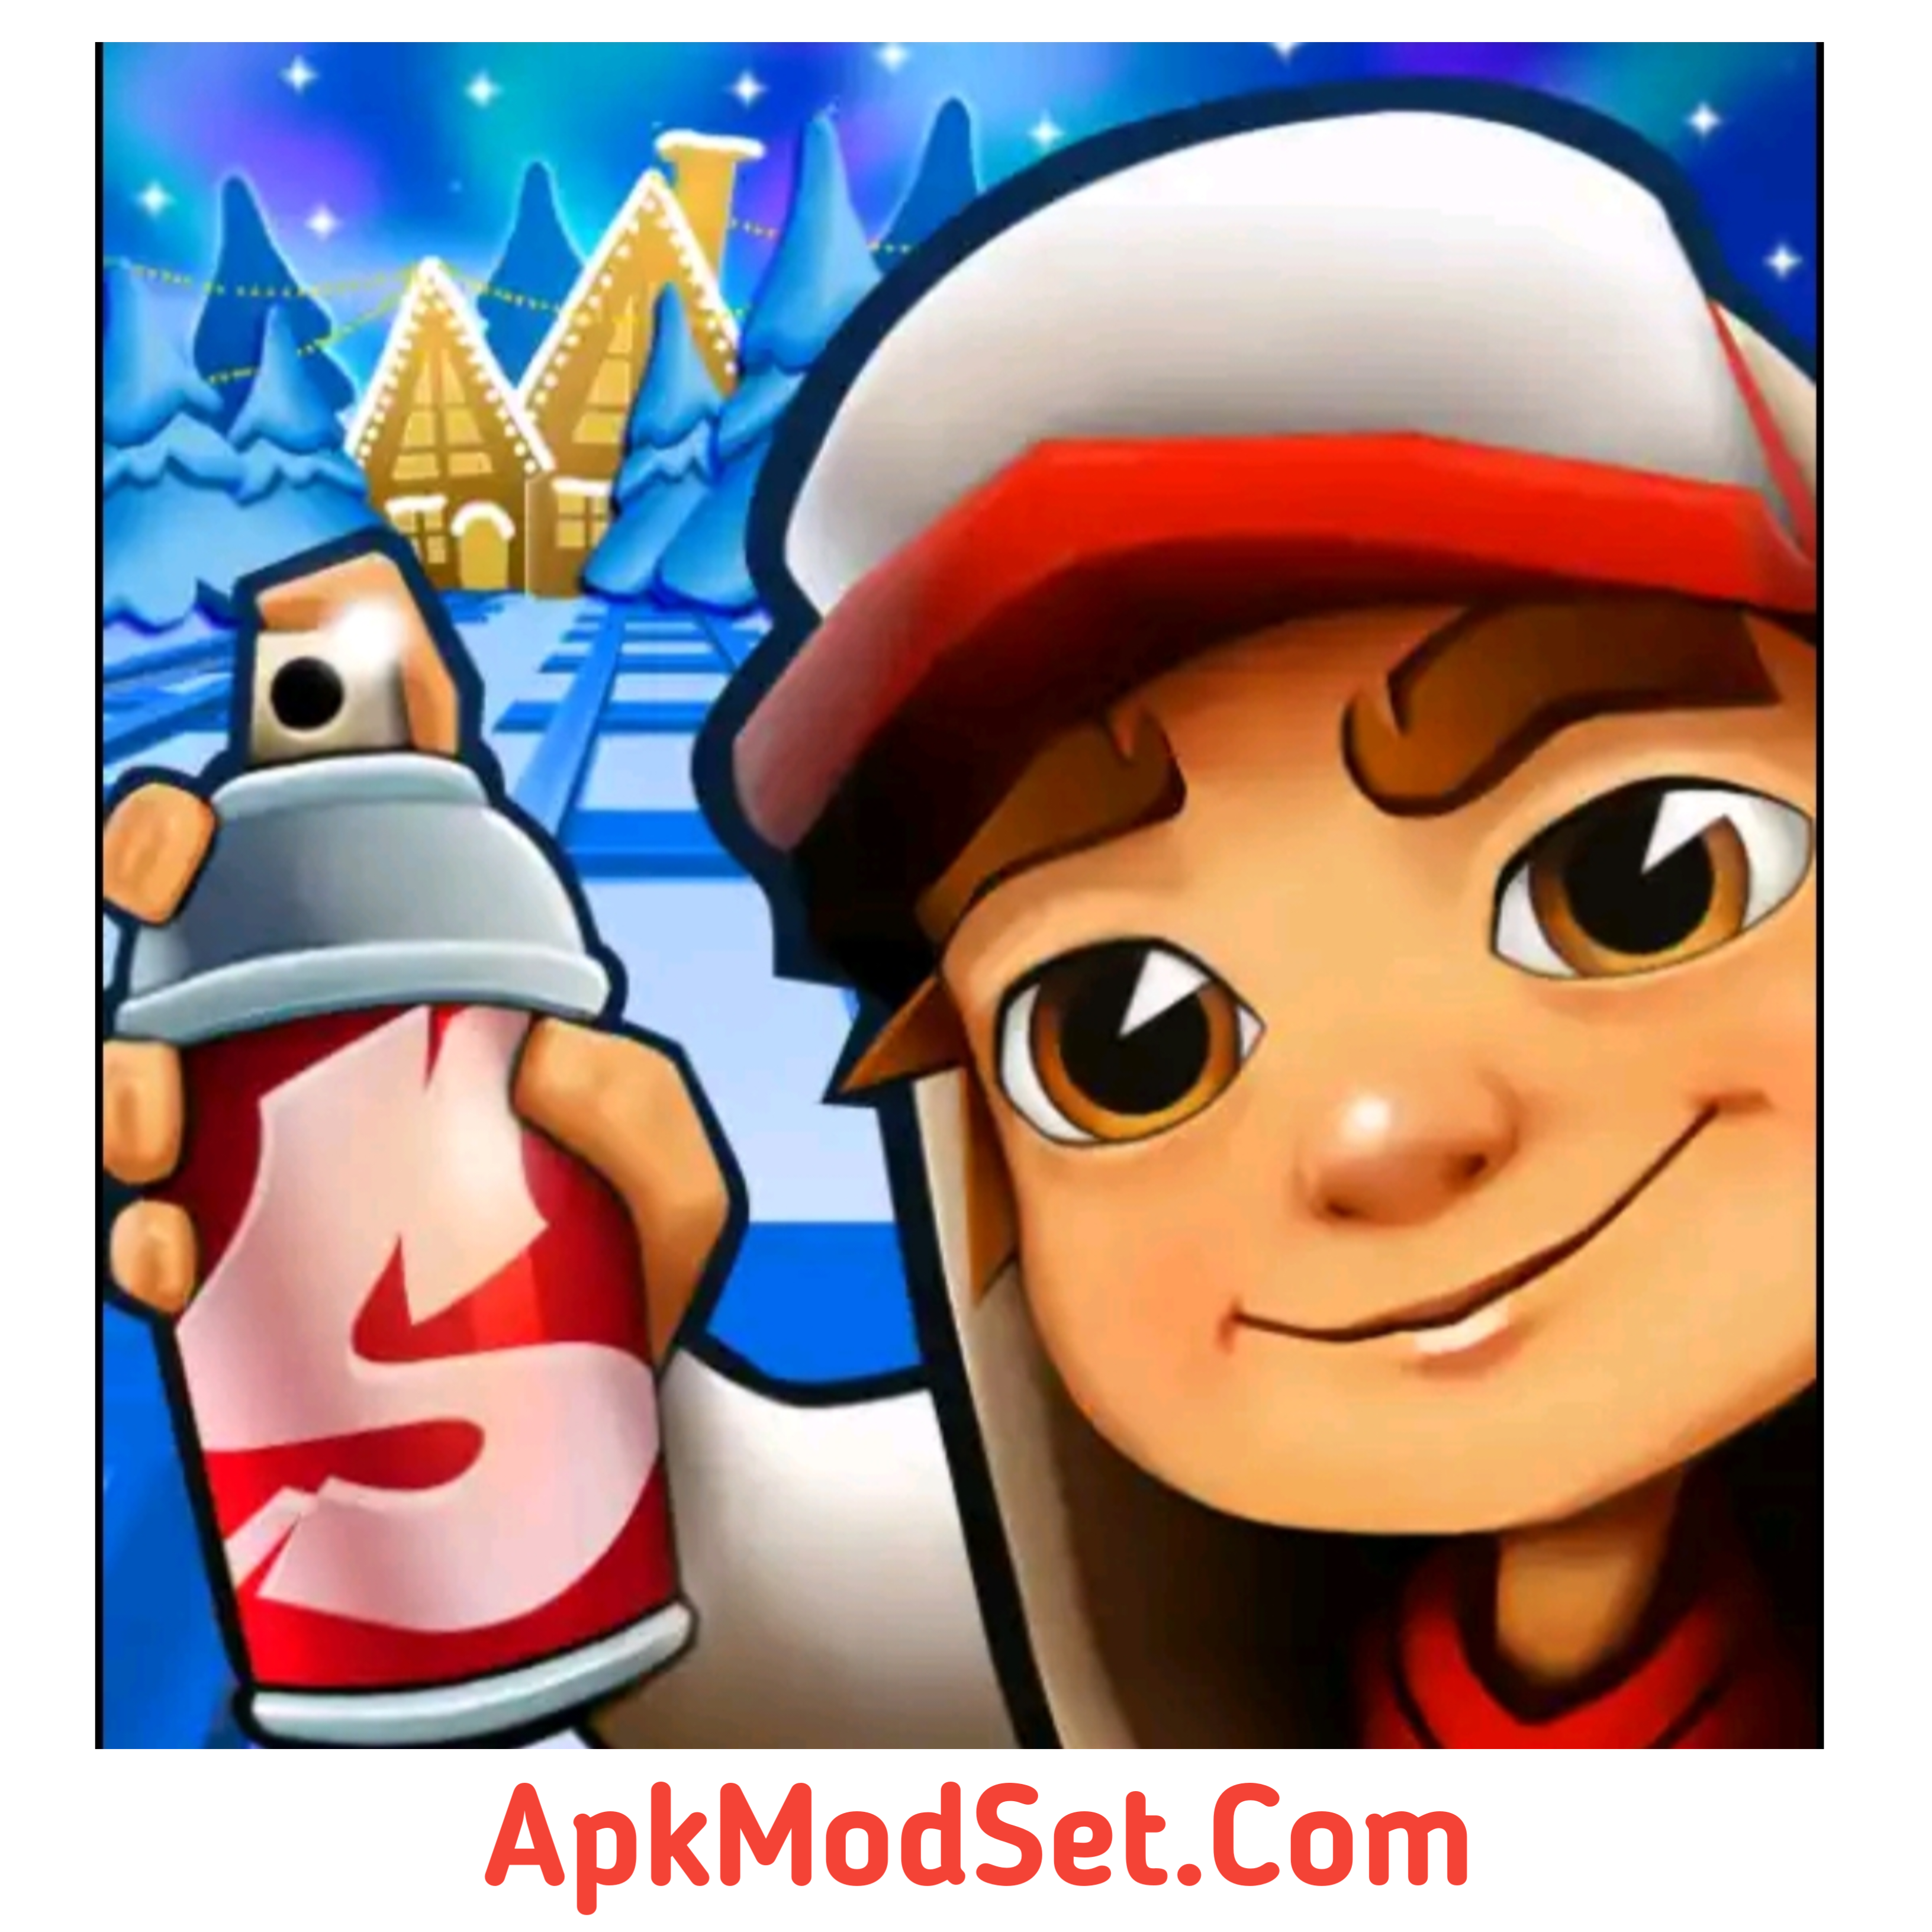 Download and Install Subway Surfers Mod APK on Android